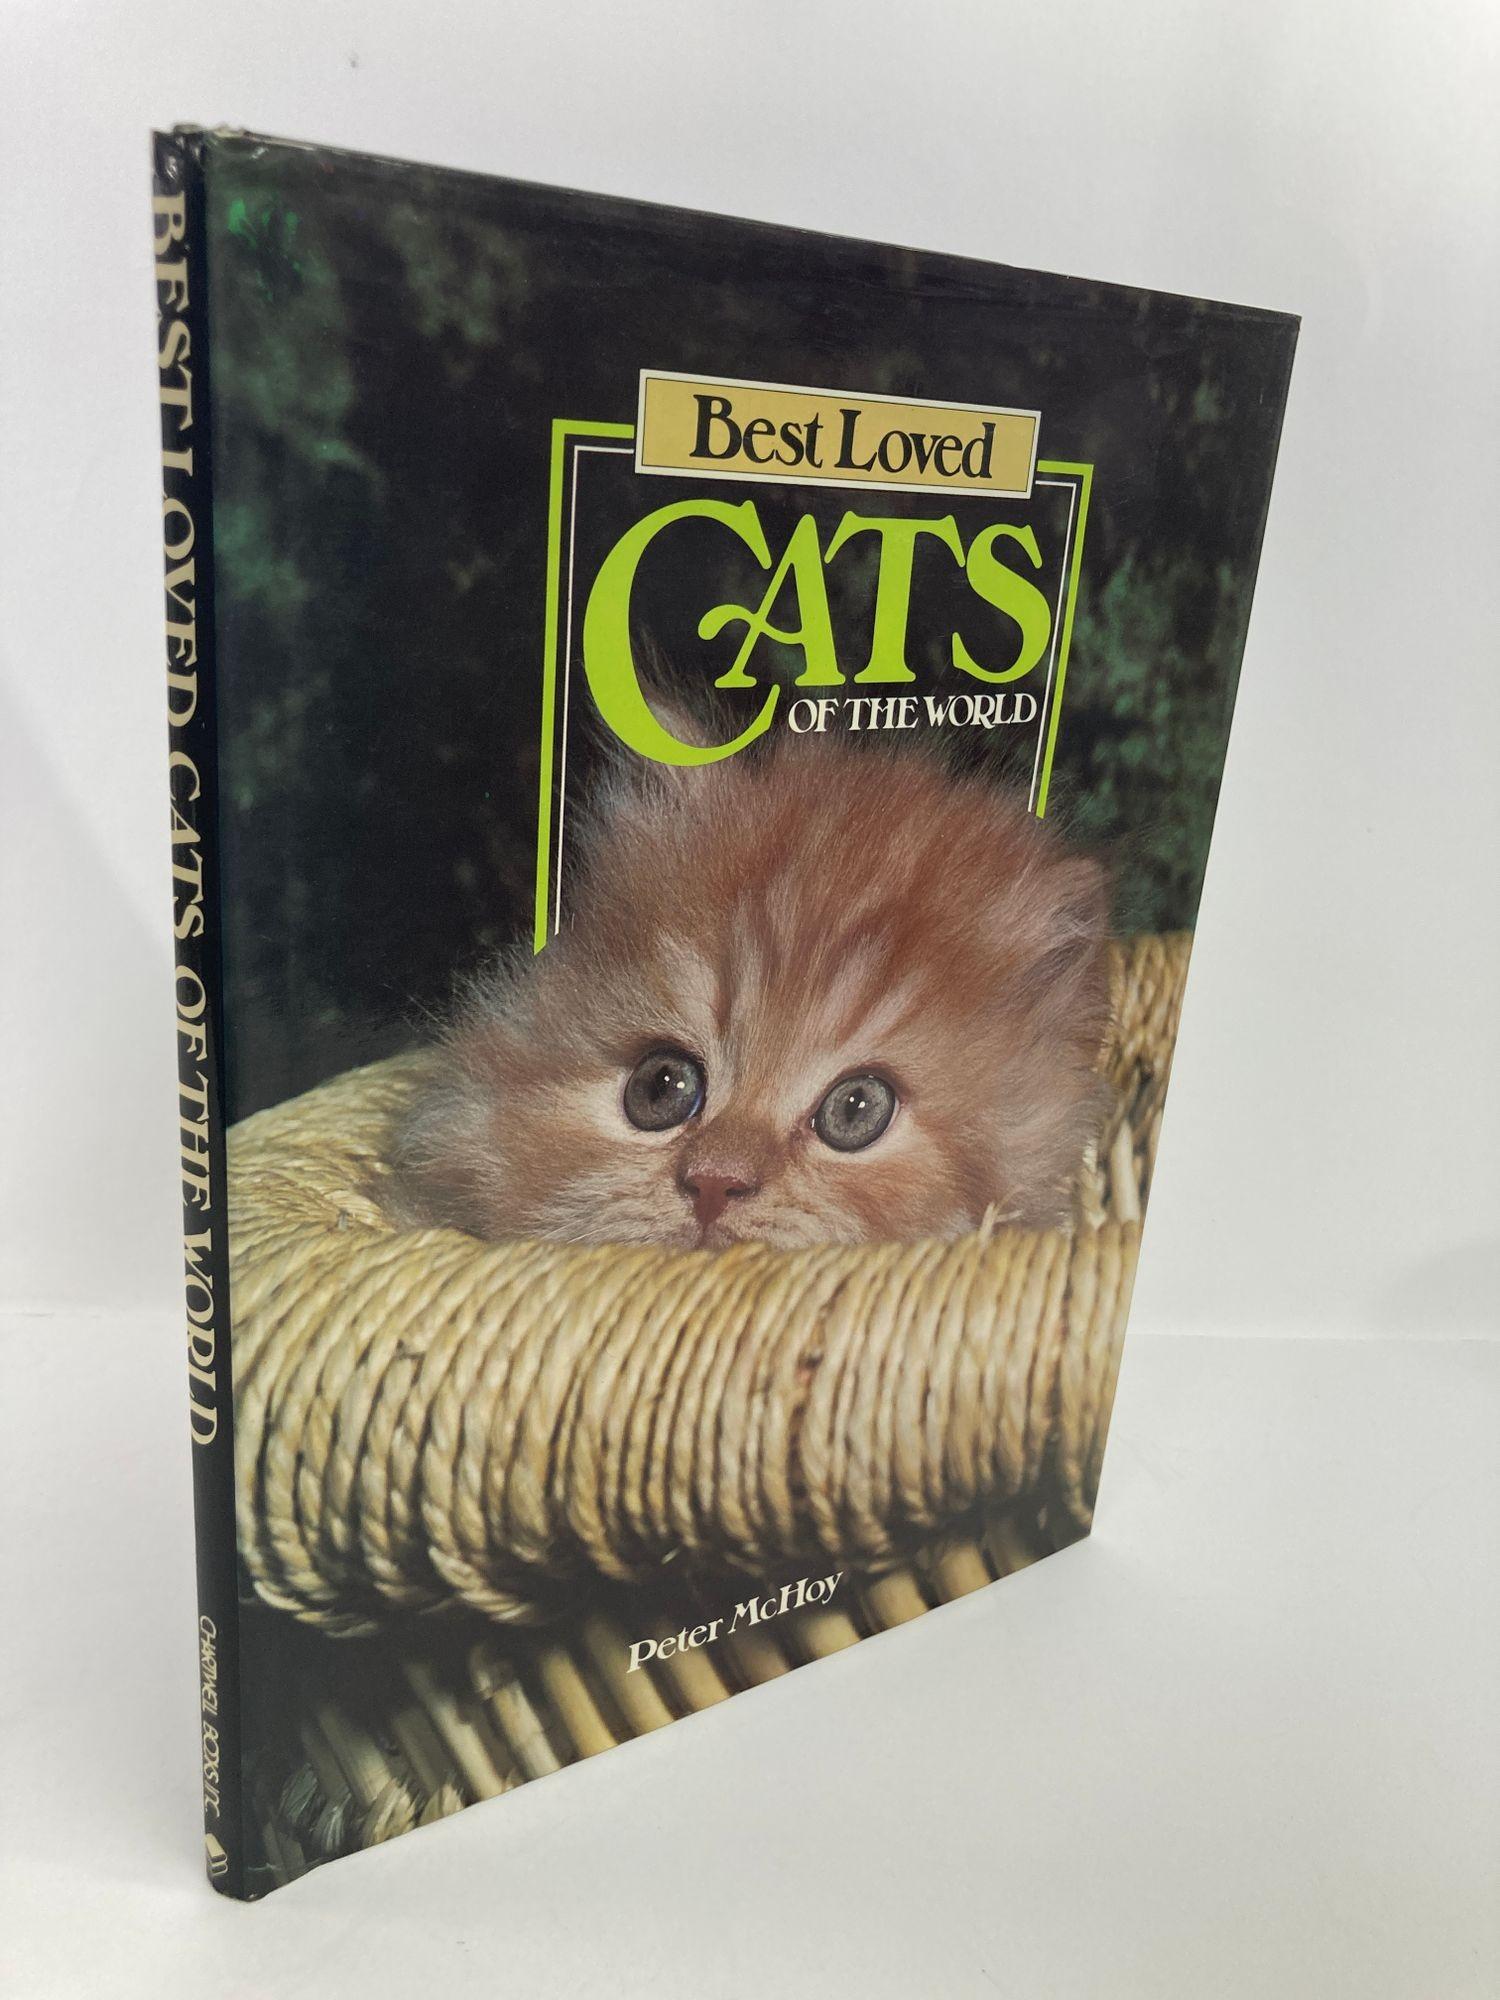 Best Loved Cats of The World hardcover book by Peter McHoy.
For every cats lover, great pictures of cats from all ranges.
Book Dimensions: 12.6 x 9.5 x 0.25 inches

Best Loved Cats of The World Hardcover Book
Publisher ? : ? Chartwell (January